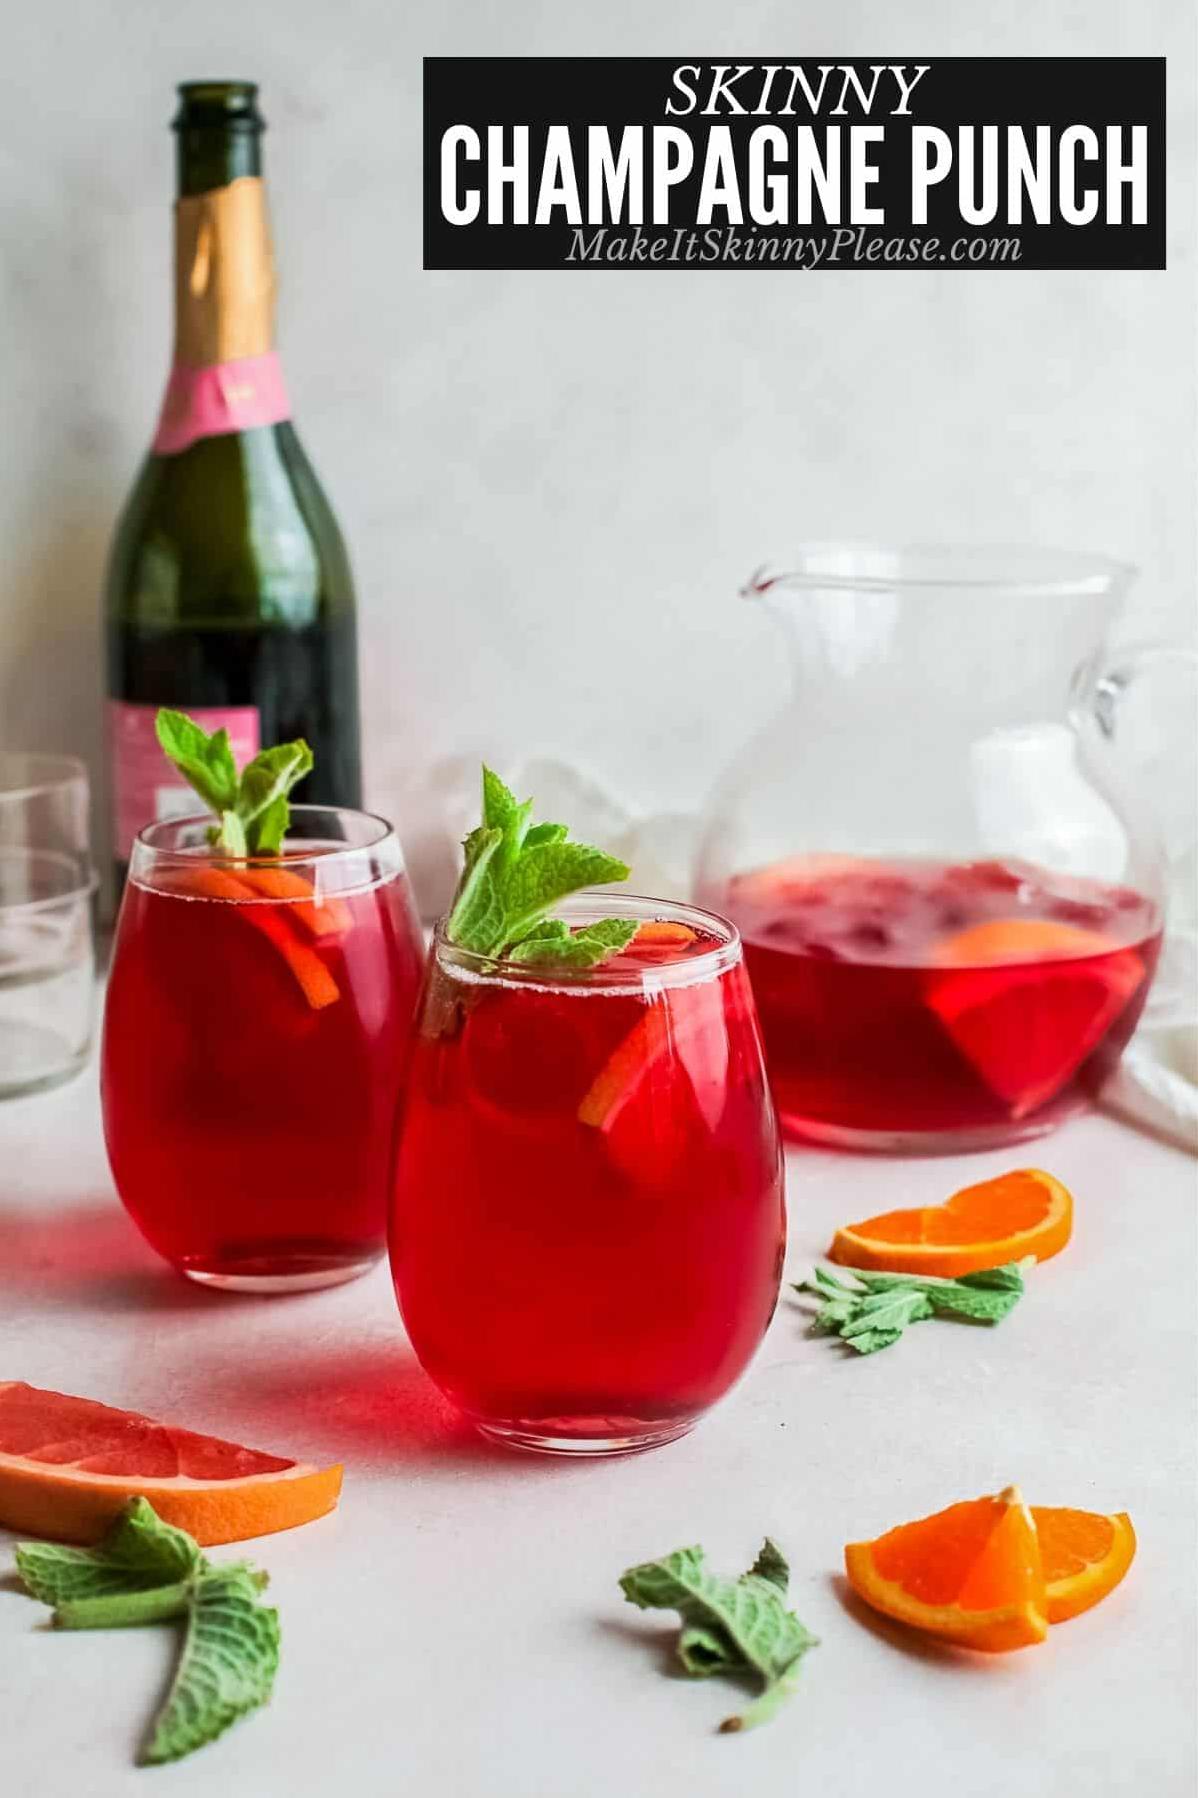  Champagne, fruit juice, and triple sec make a heavenly combination.